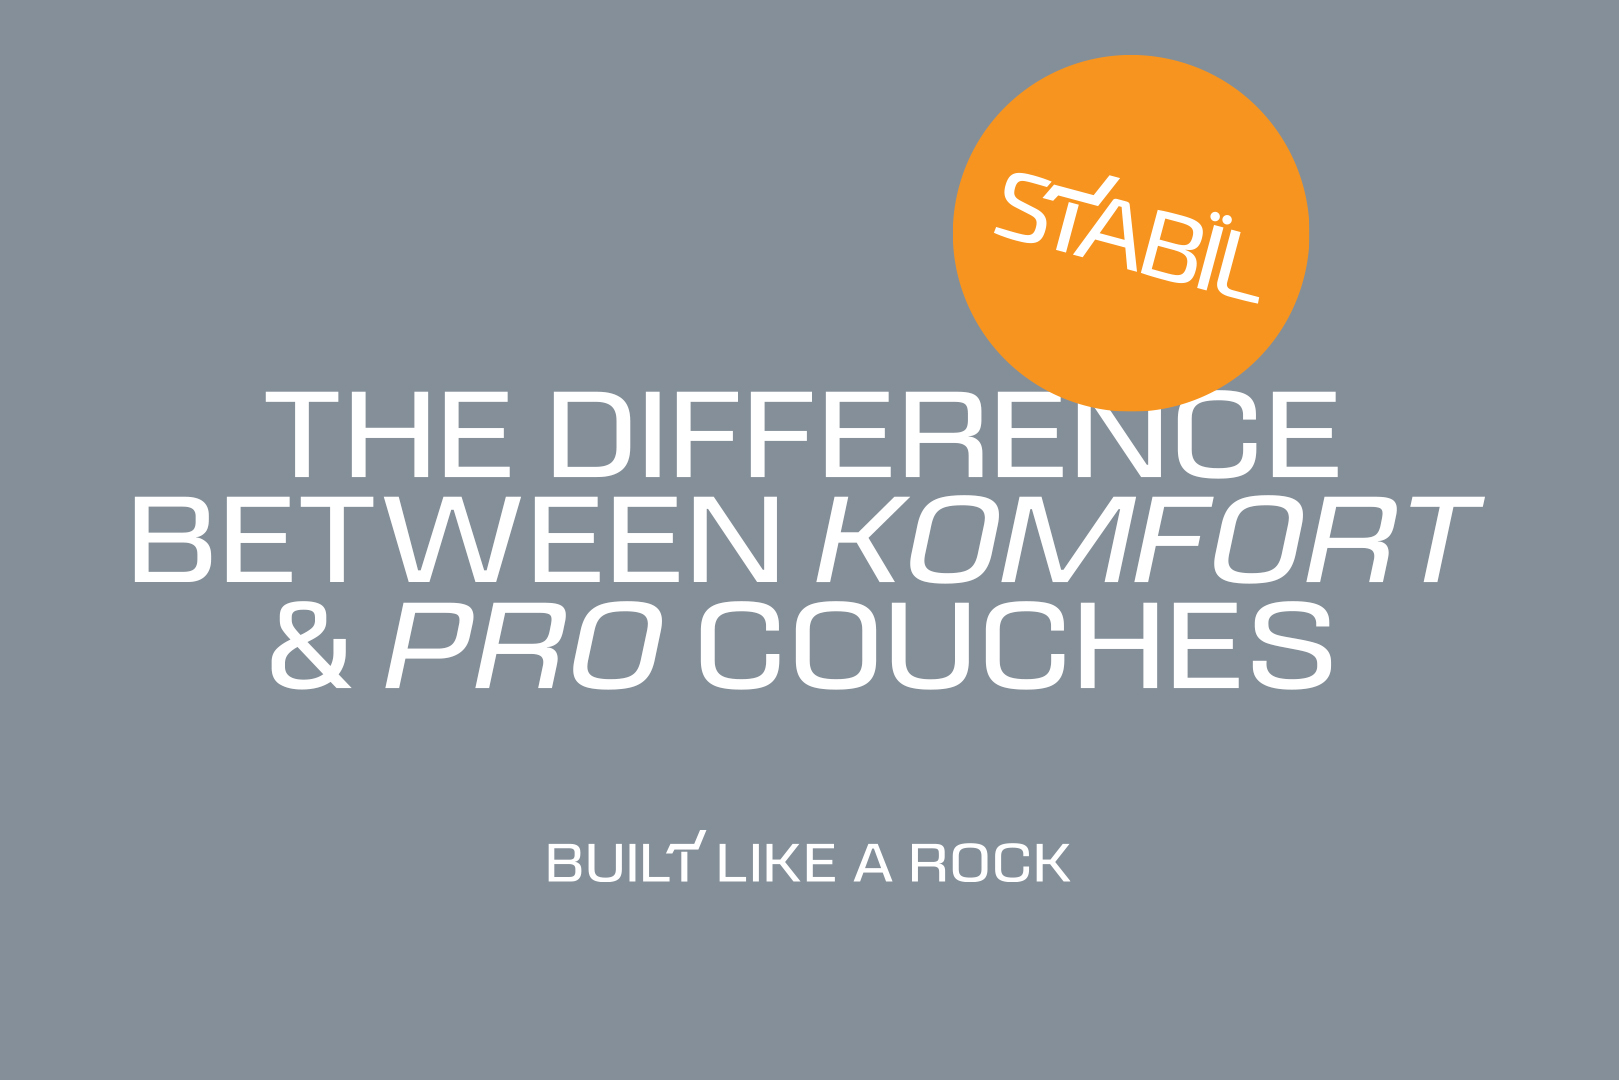 The Difference Between Komfort & Pro Couches